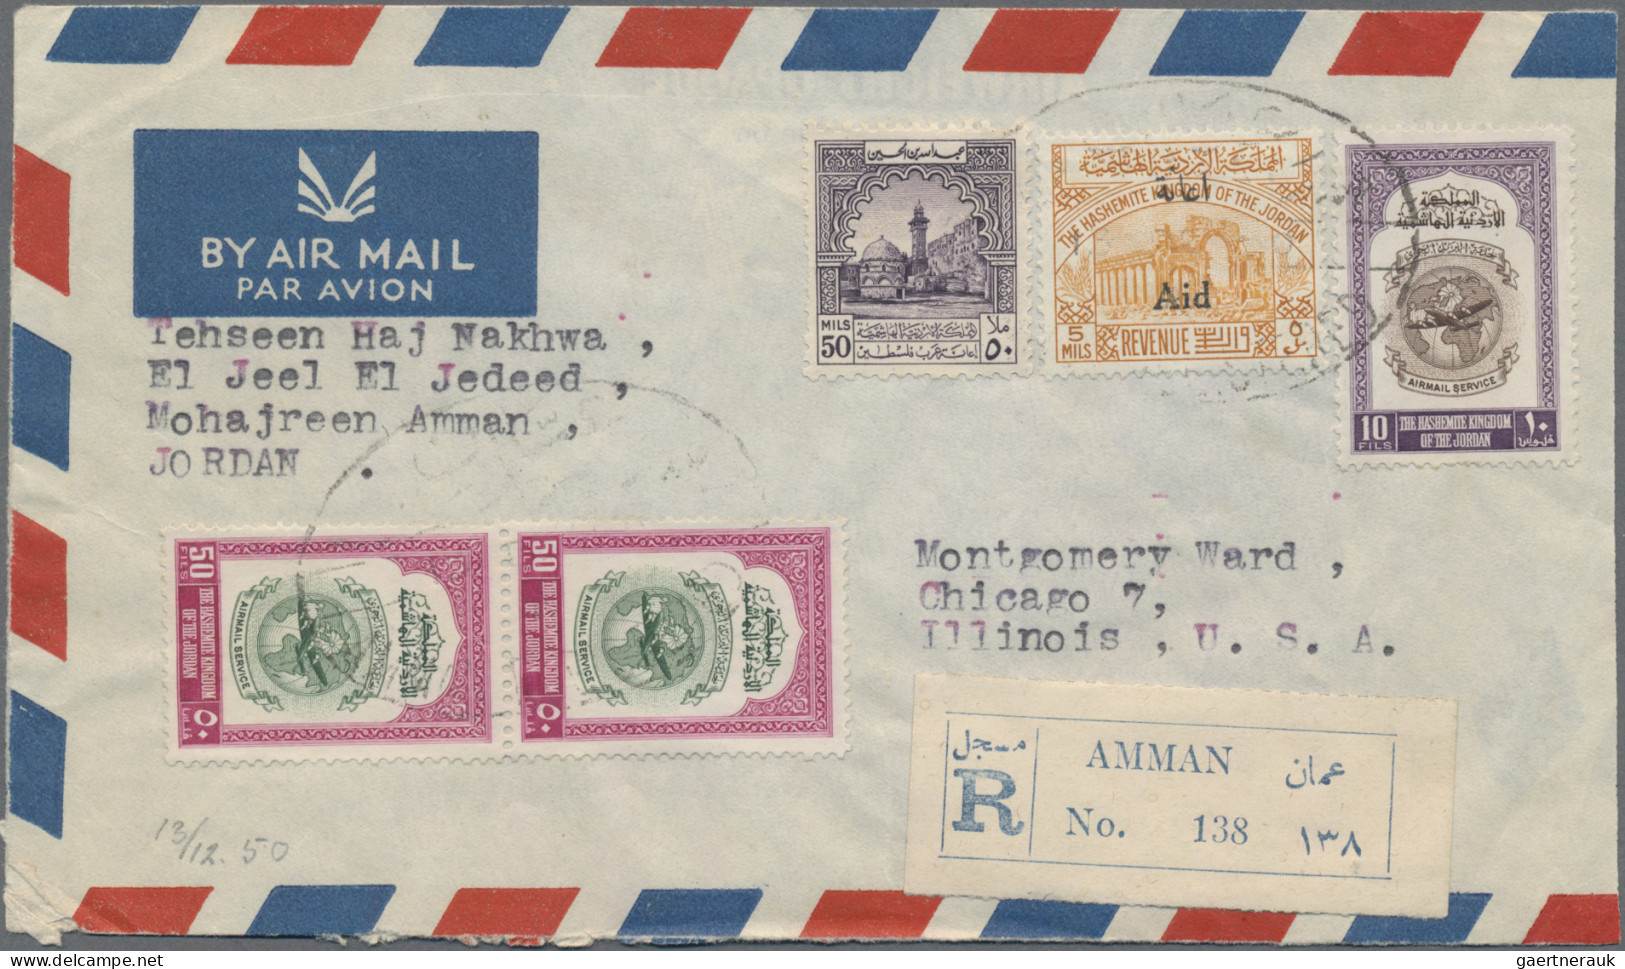 Palestine: 1950/59, two covers used from Jerusalem (one mixed frank with Jordan)